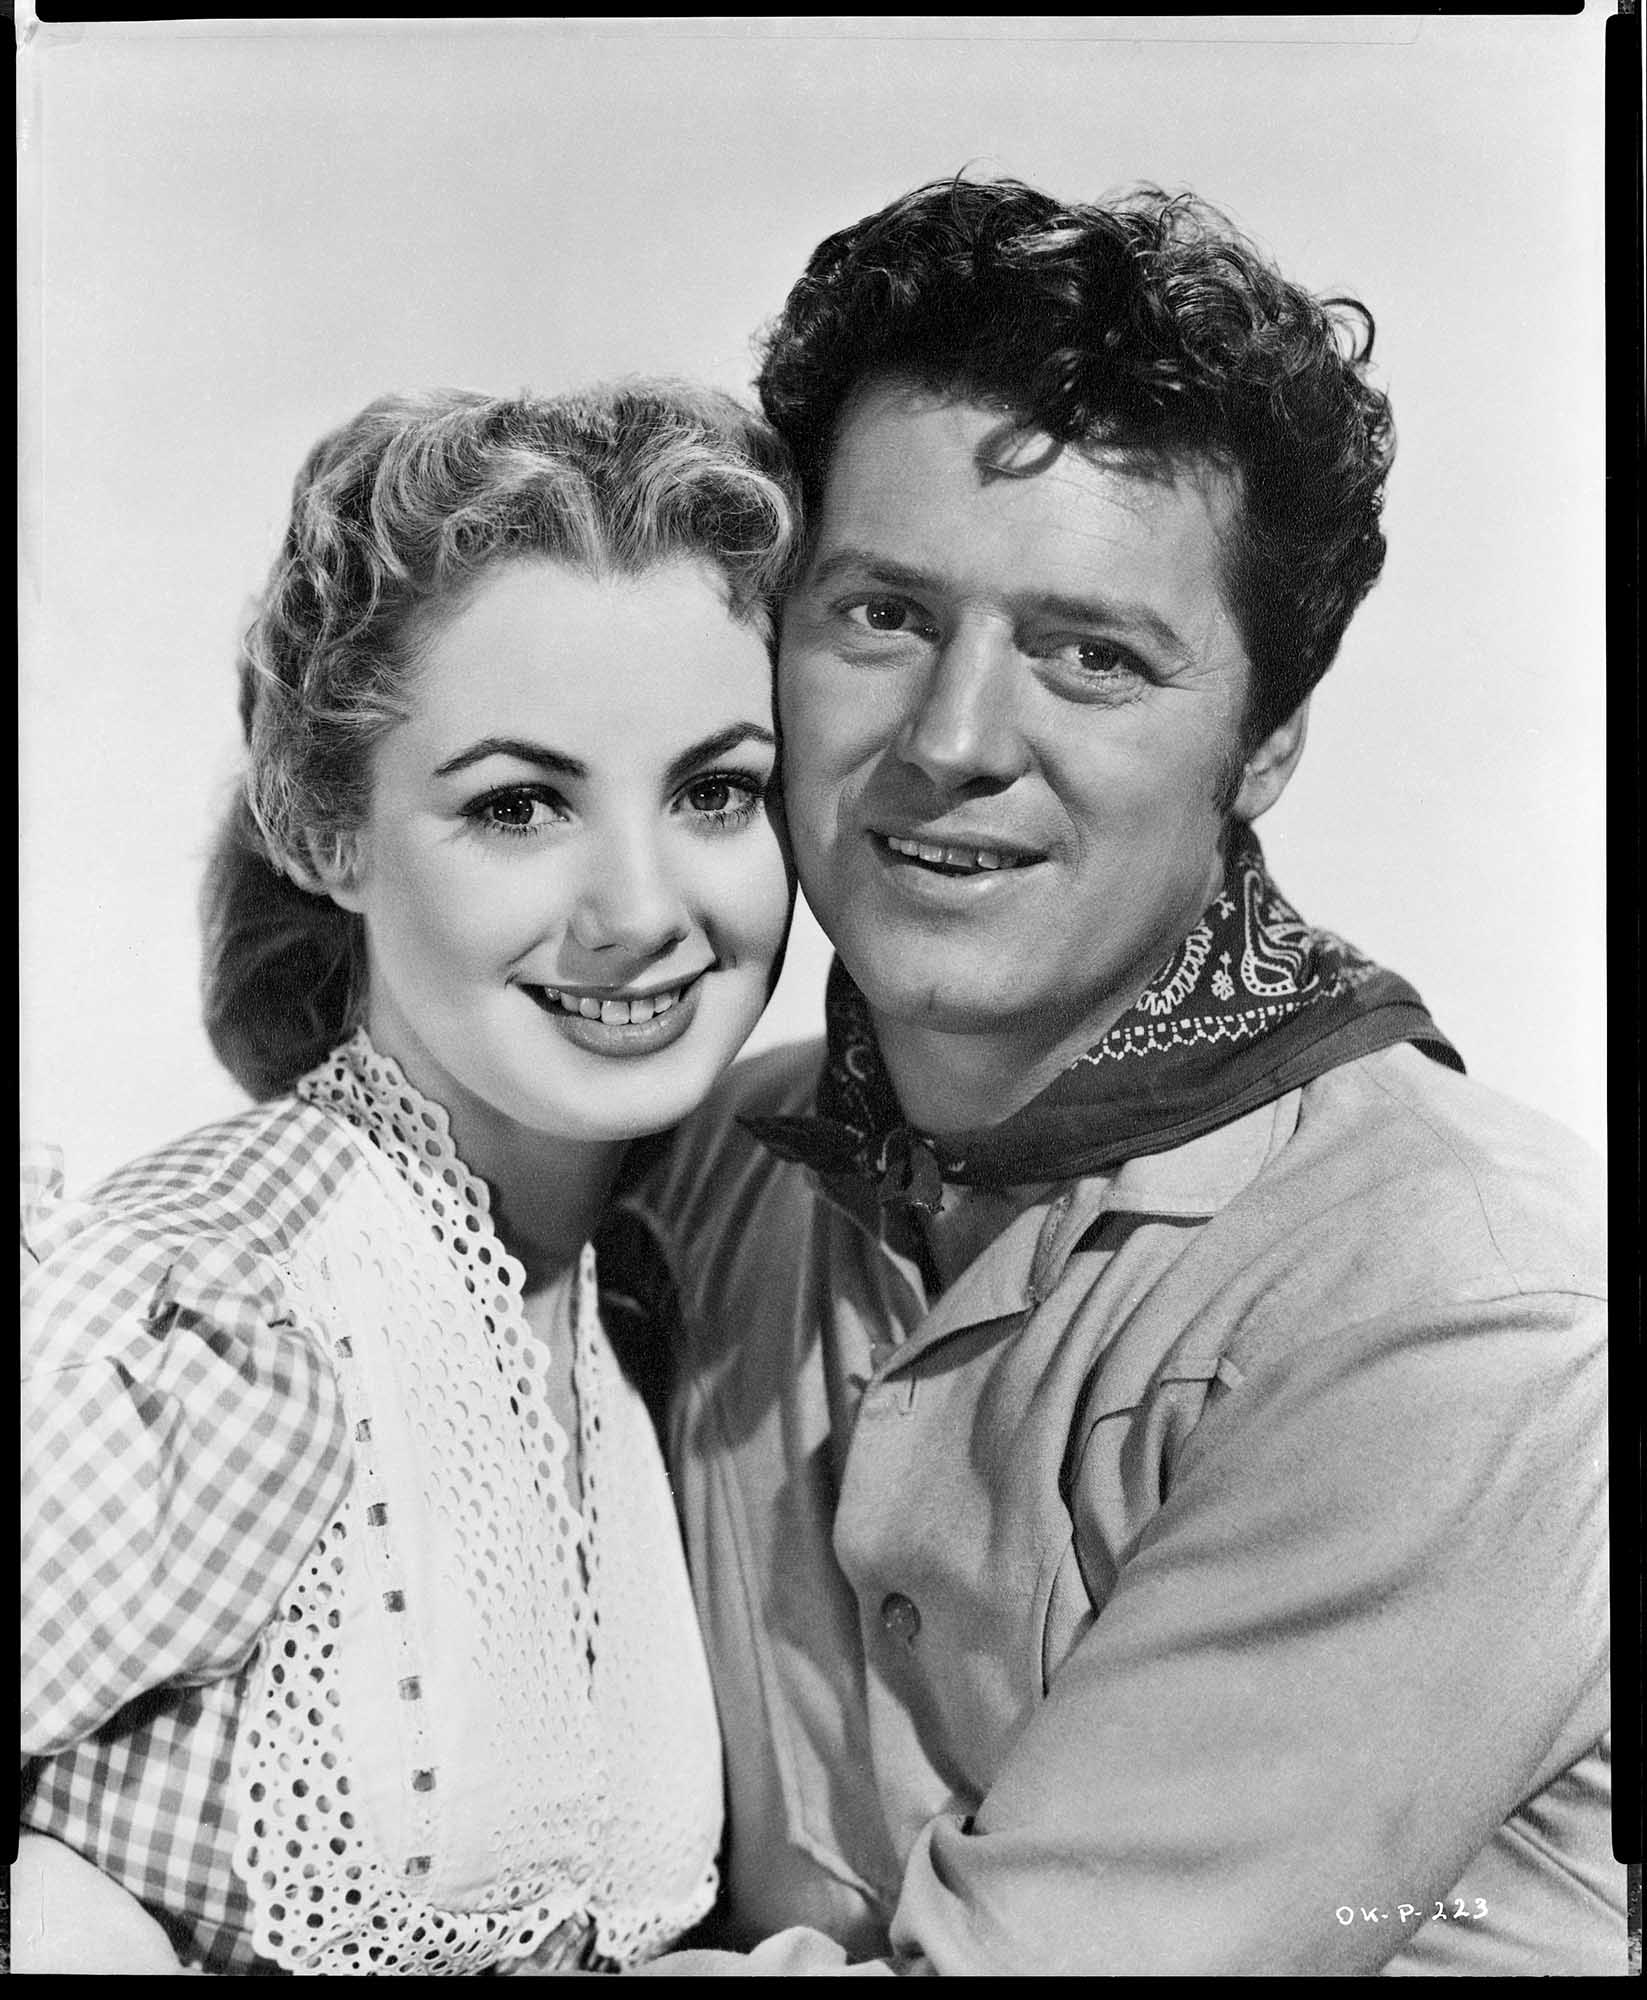 A photo from the 1955 Oklahoma! film.